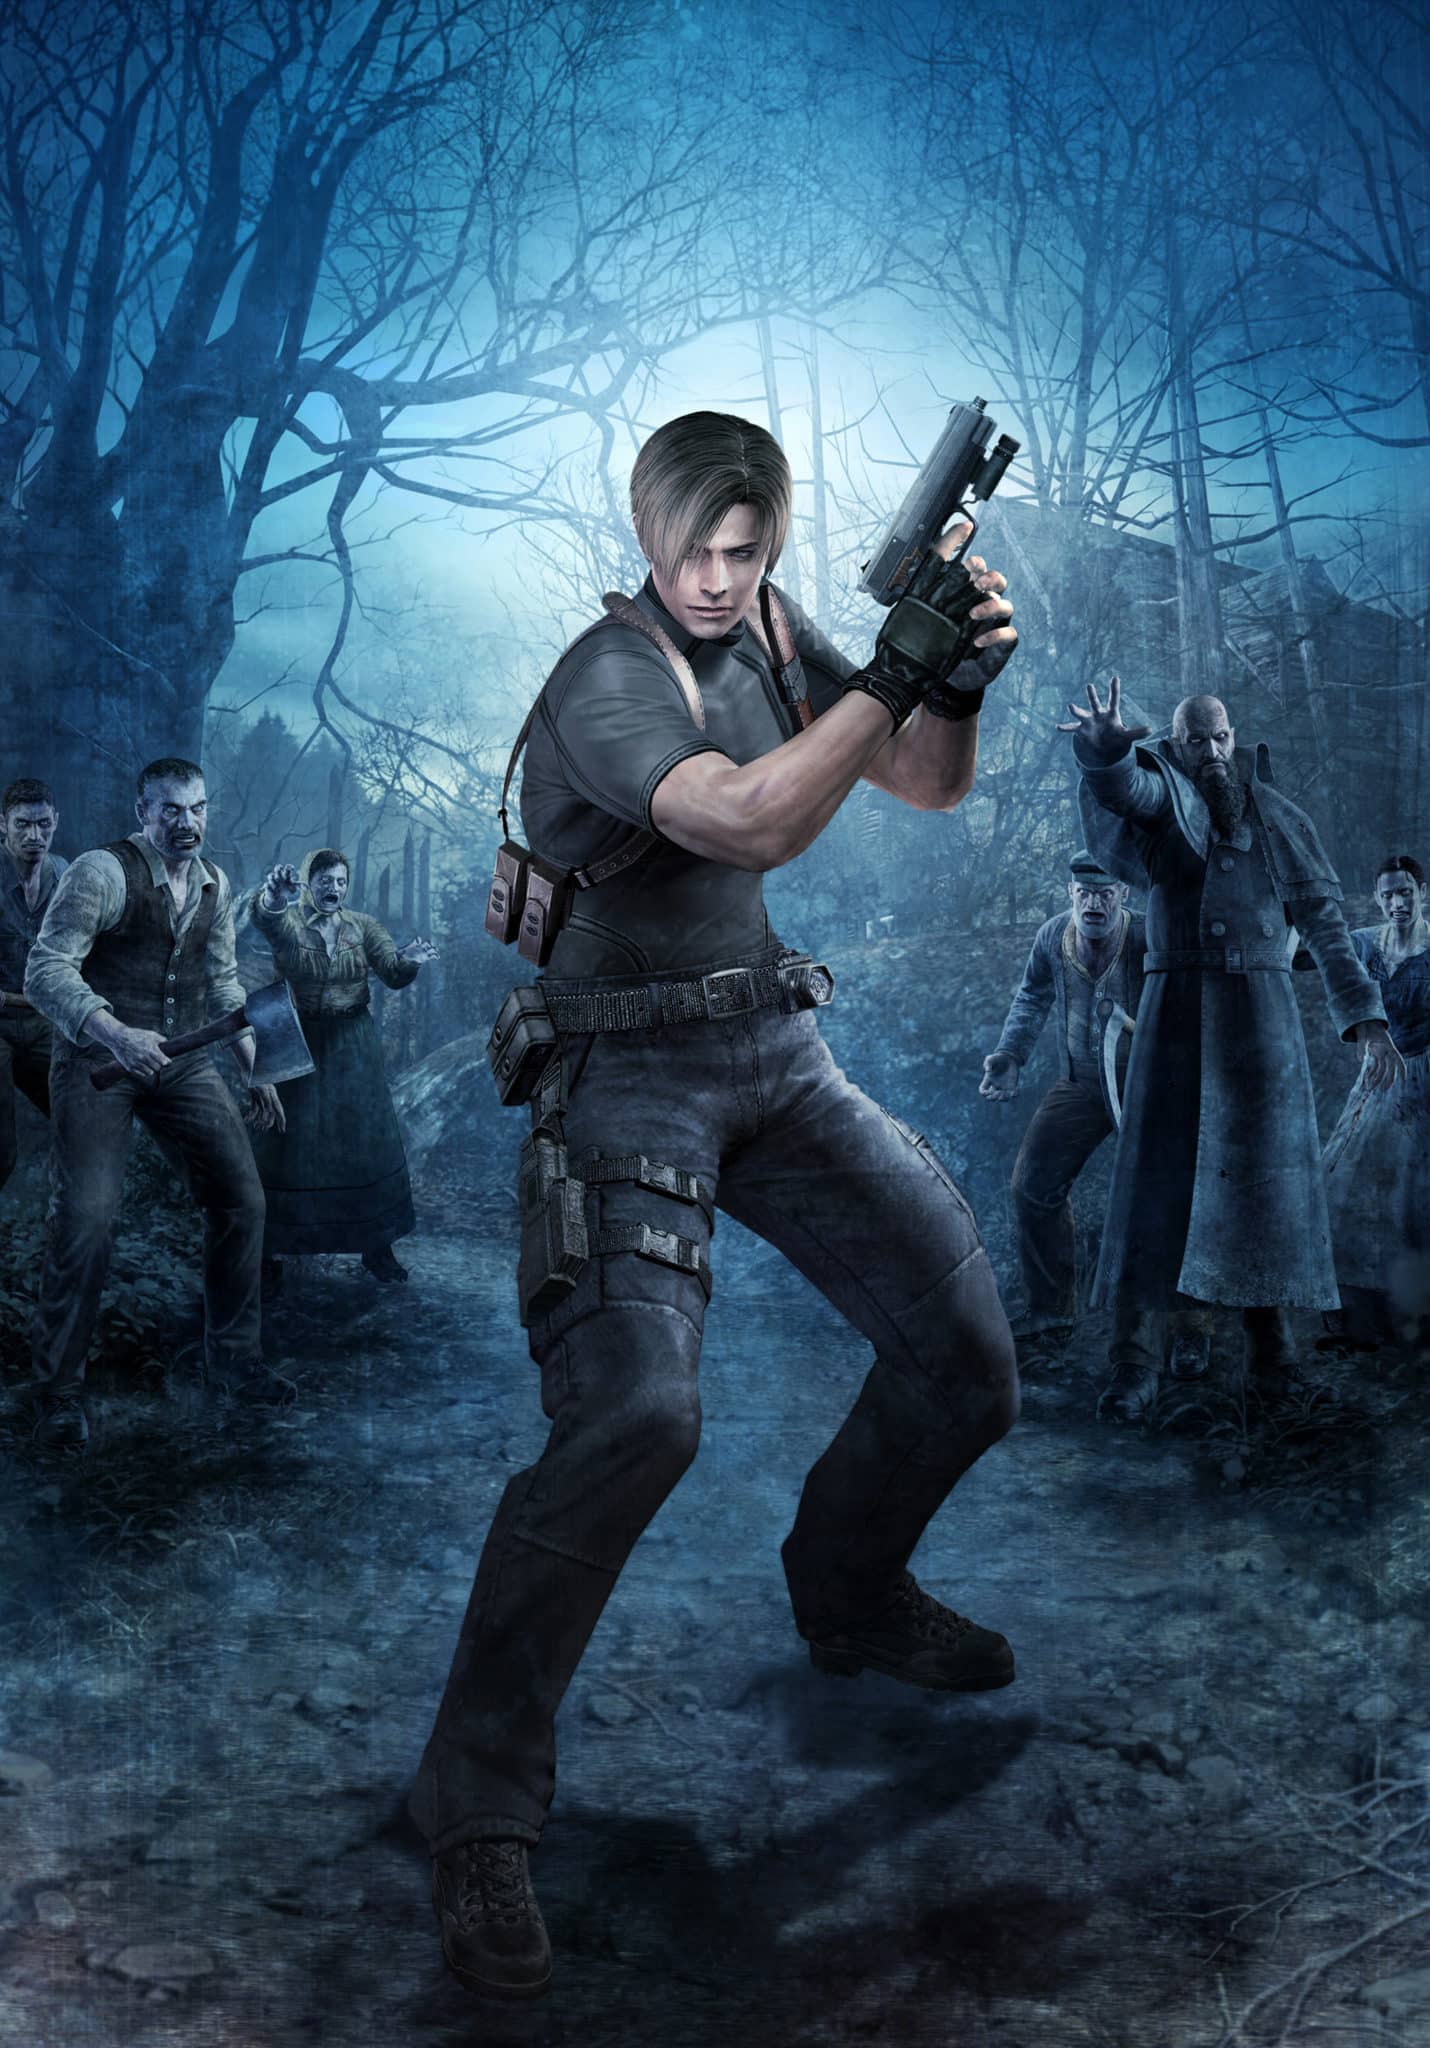 Report: Capcom is Working on a Resident Evil 4 Remake